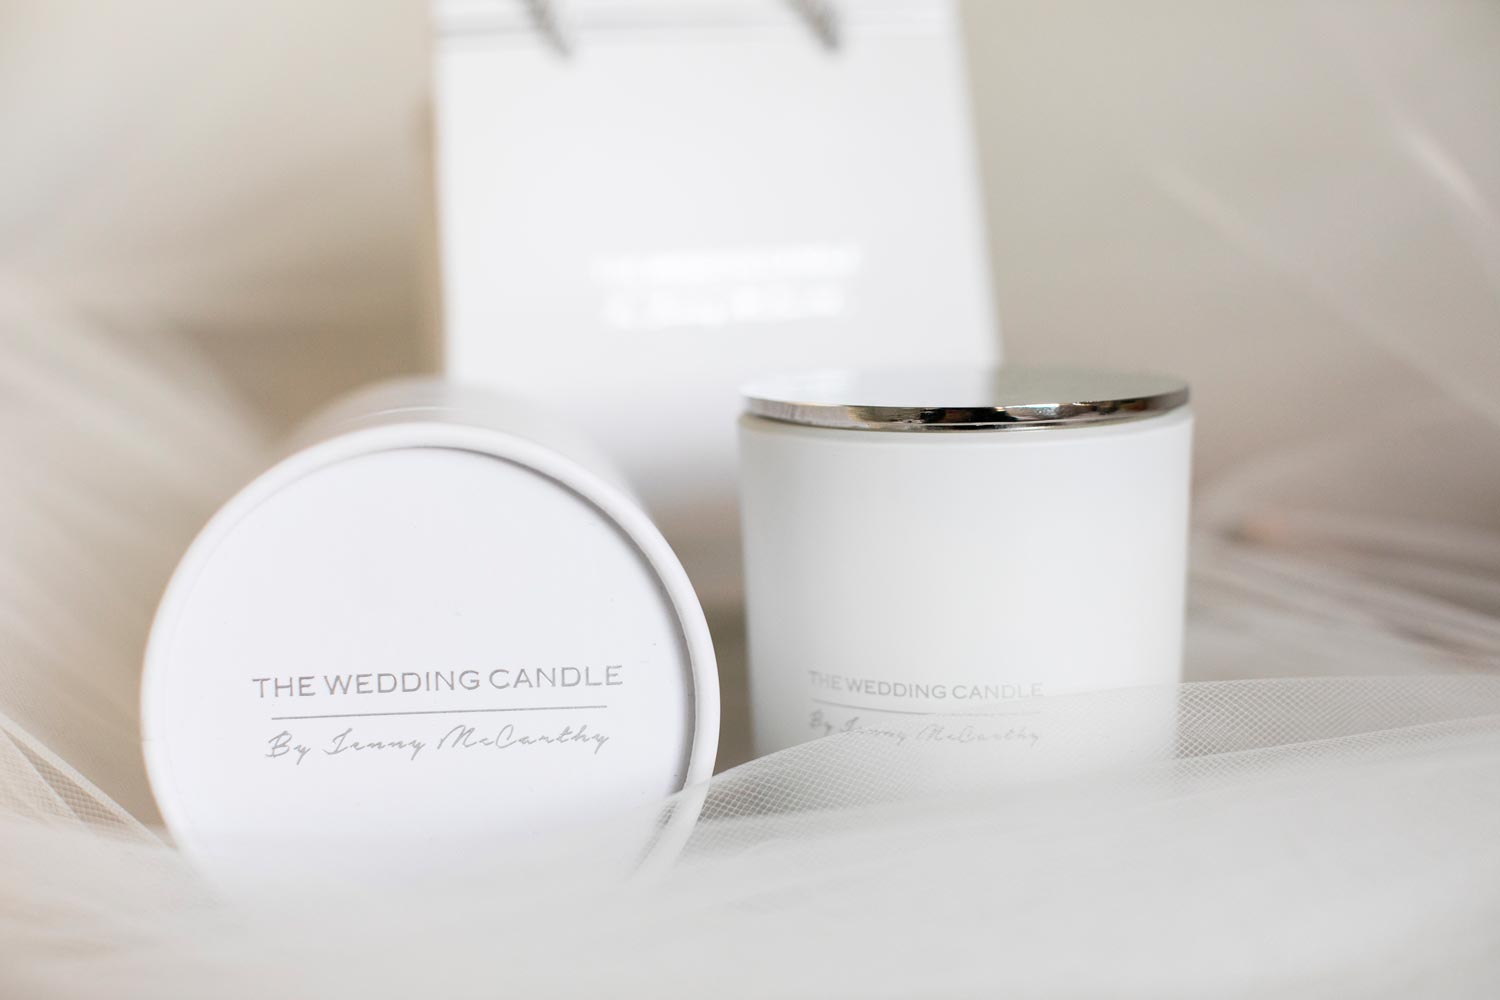 Load video: Video of the wedding candle by Jenny McCarthy